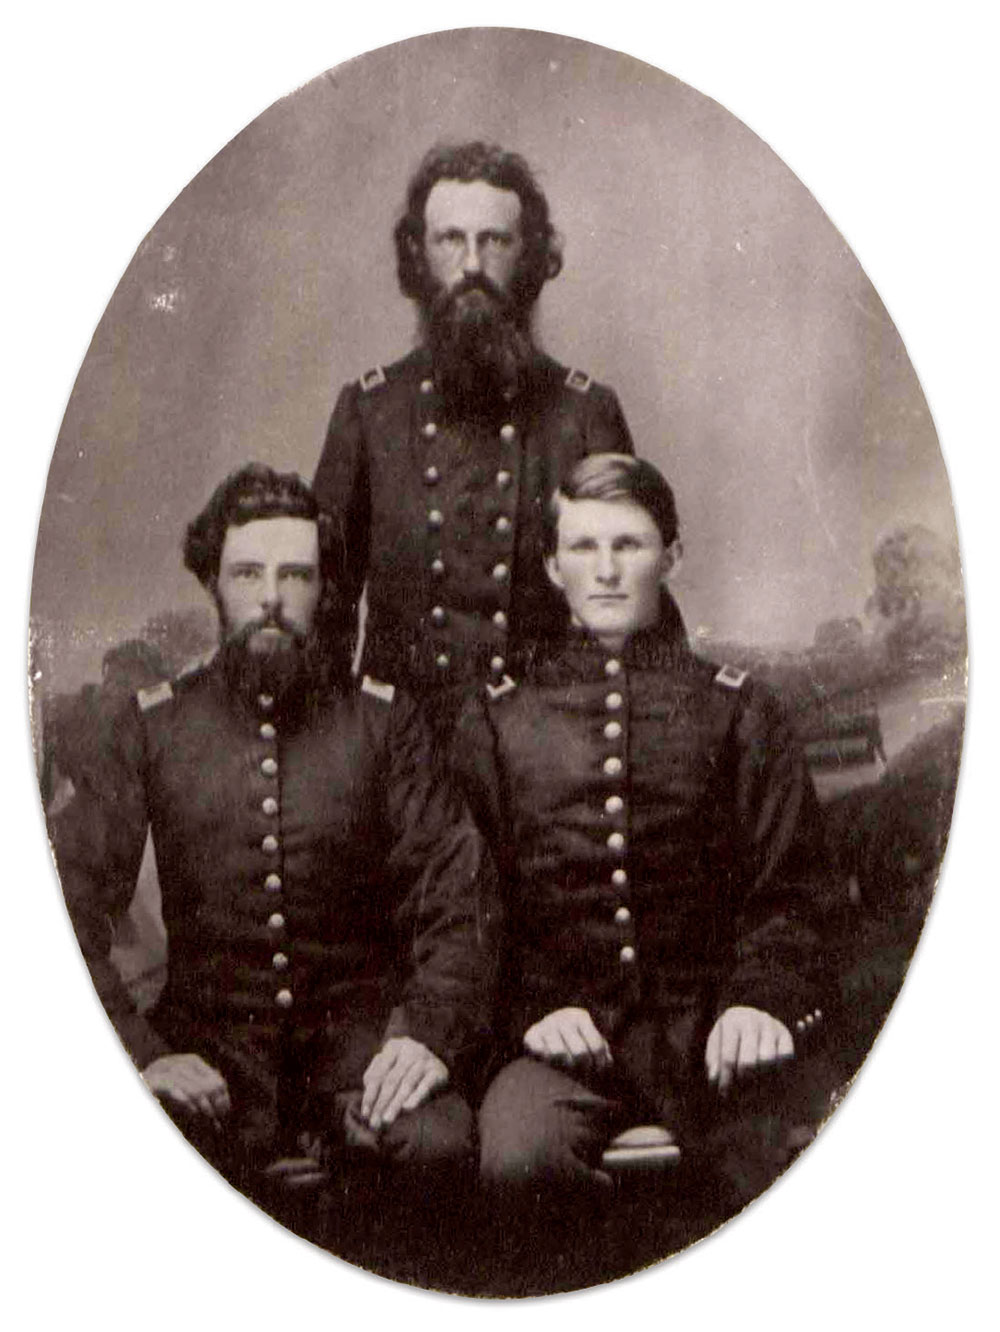 Rogers stands behind Adj. Dewhurst (left) and Asst. Surg. Minor. Print by an unidentified photographer. U.S. Army Heritage and Education Center.